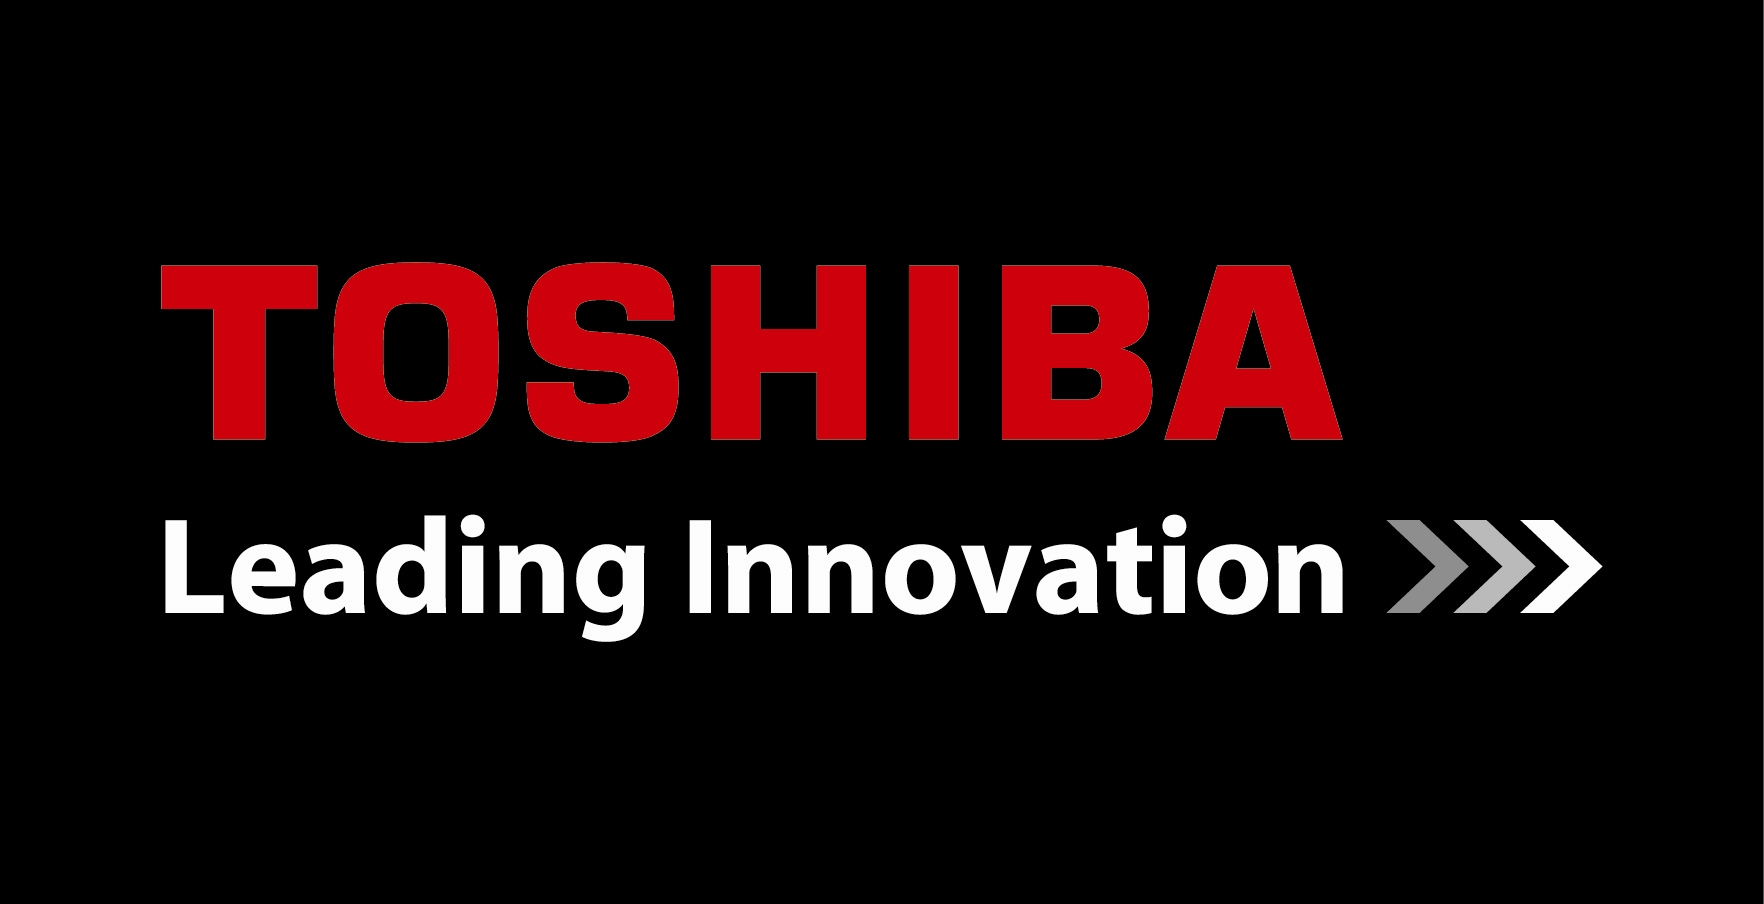 Toshiba has developed a 30 kW mobile hydrogen fuel cell system.